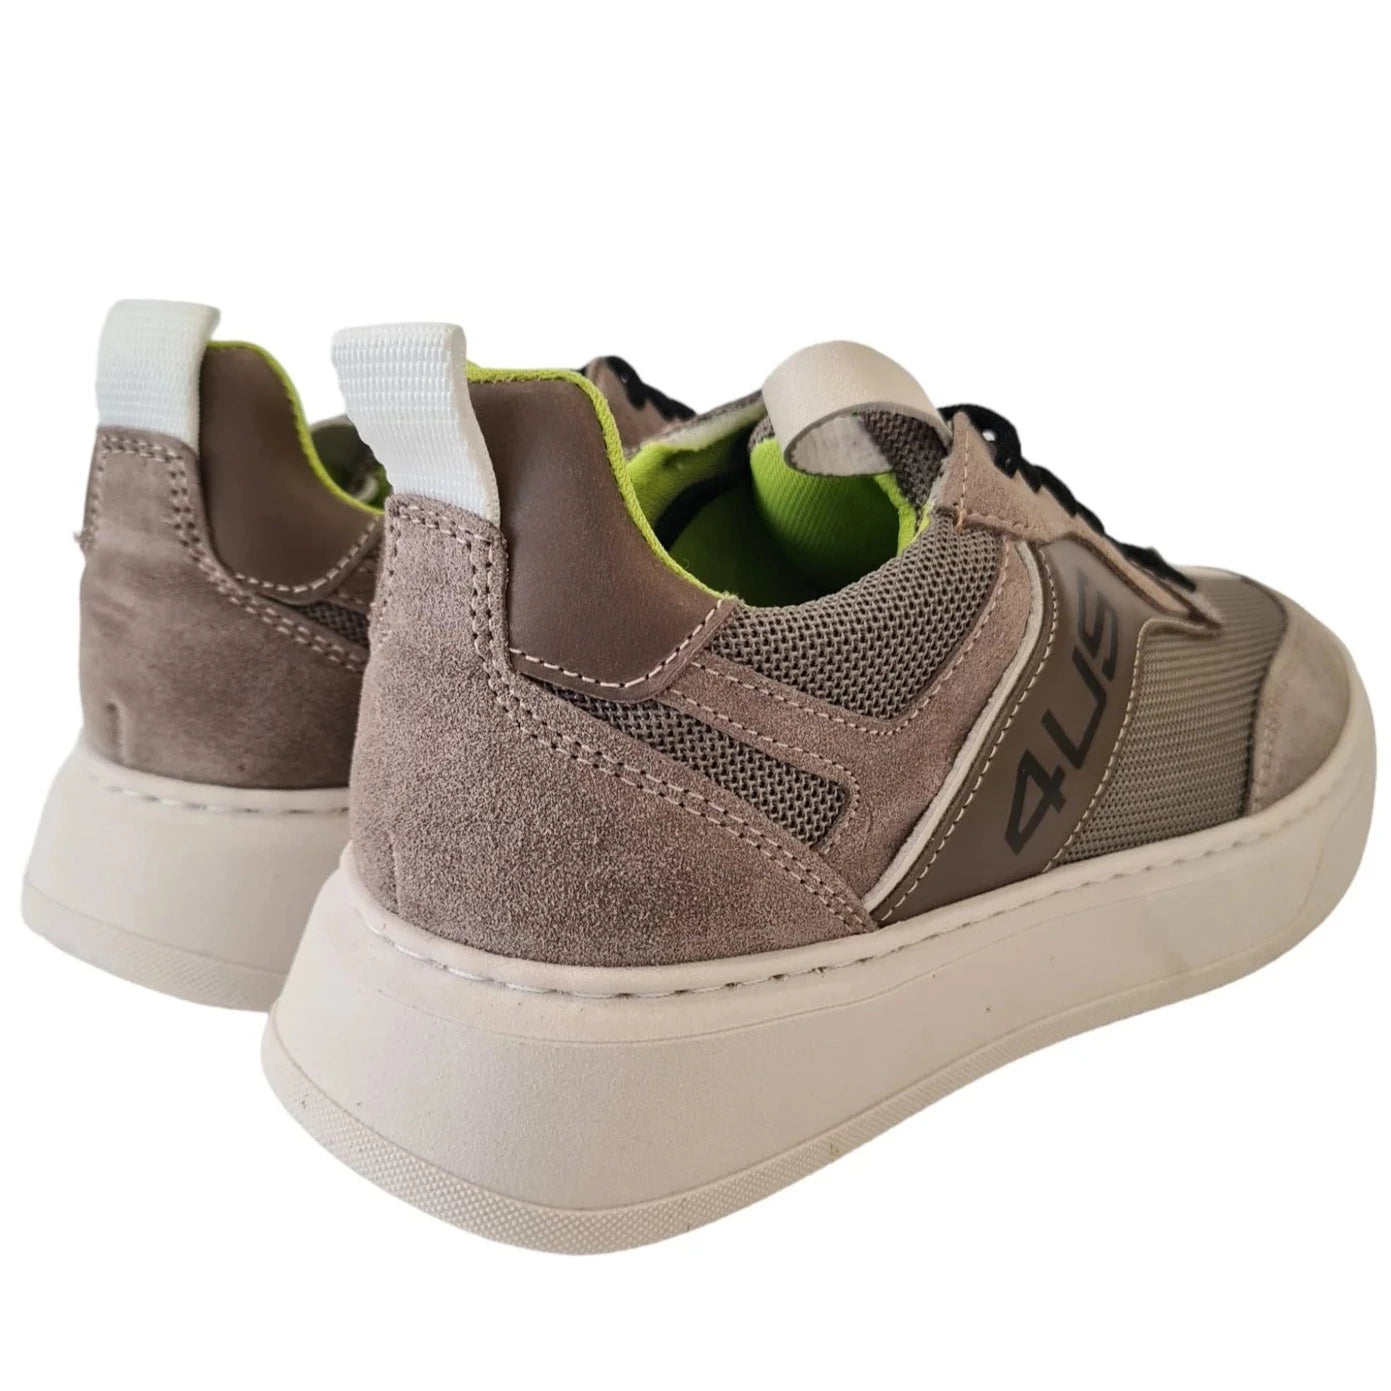 Sneakers Cesare Paciotti 4us man taupe leather and fabric